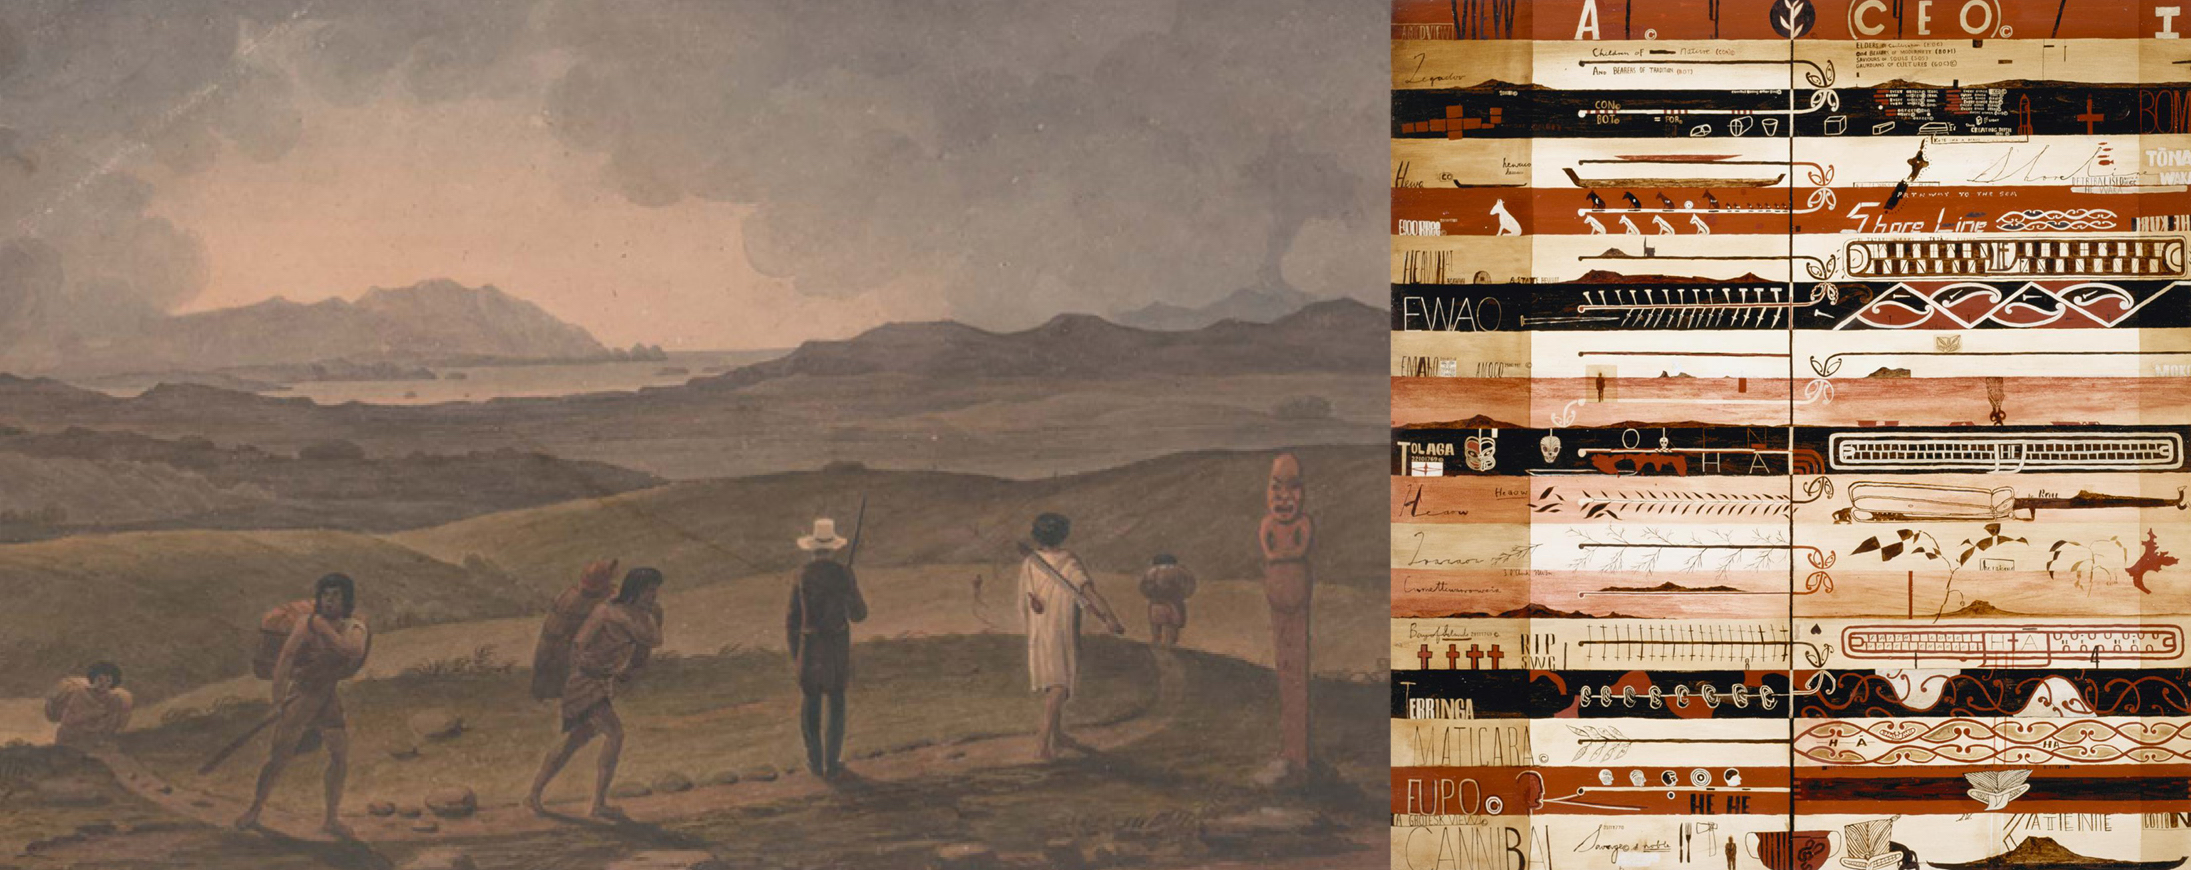 LEFT: Augustus Earle, Distant View of the Bay of Islands, 1827. Watercolor on paper. National Library of Australia, Rex Nan Kivell Collection NK12/70; RIGHT: Shane Cotton, Viewed, 1997. Oil on canvas. National Gallery of Victoria, Melbourne 1997.424 © Shane Cotton